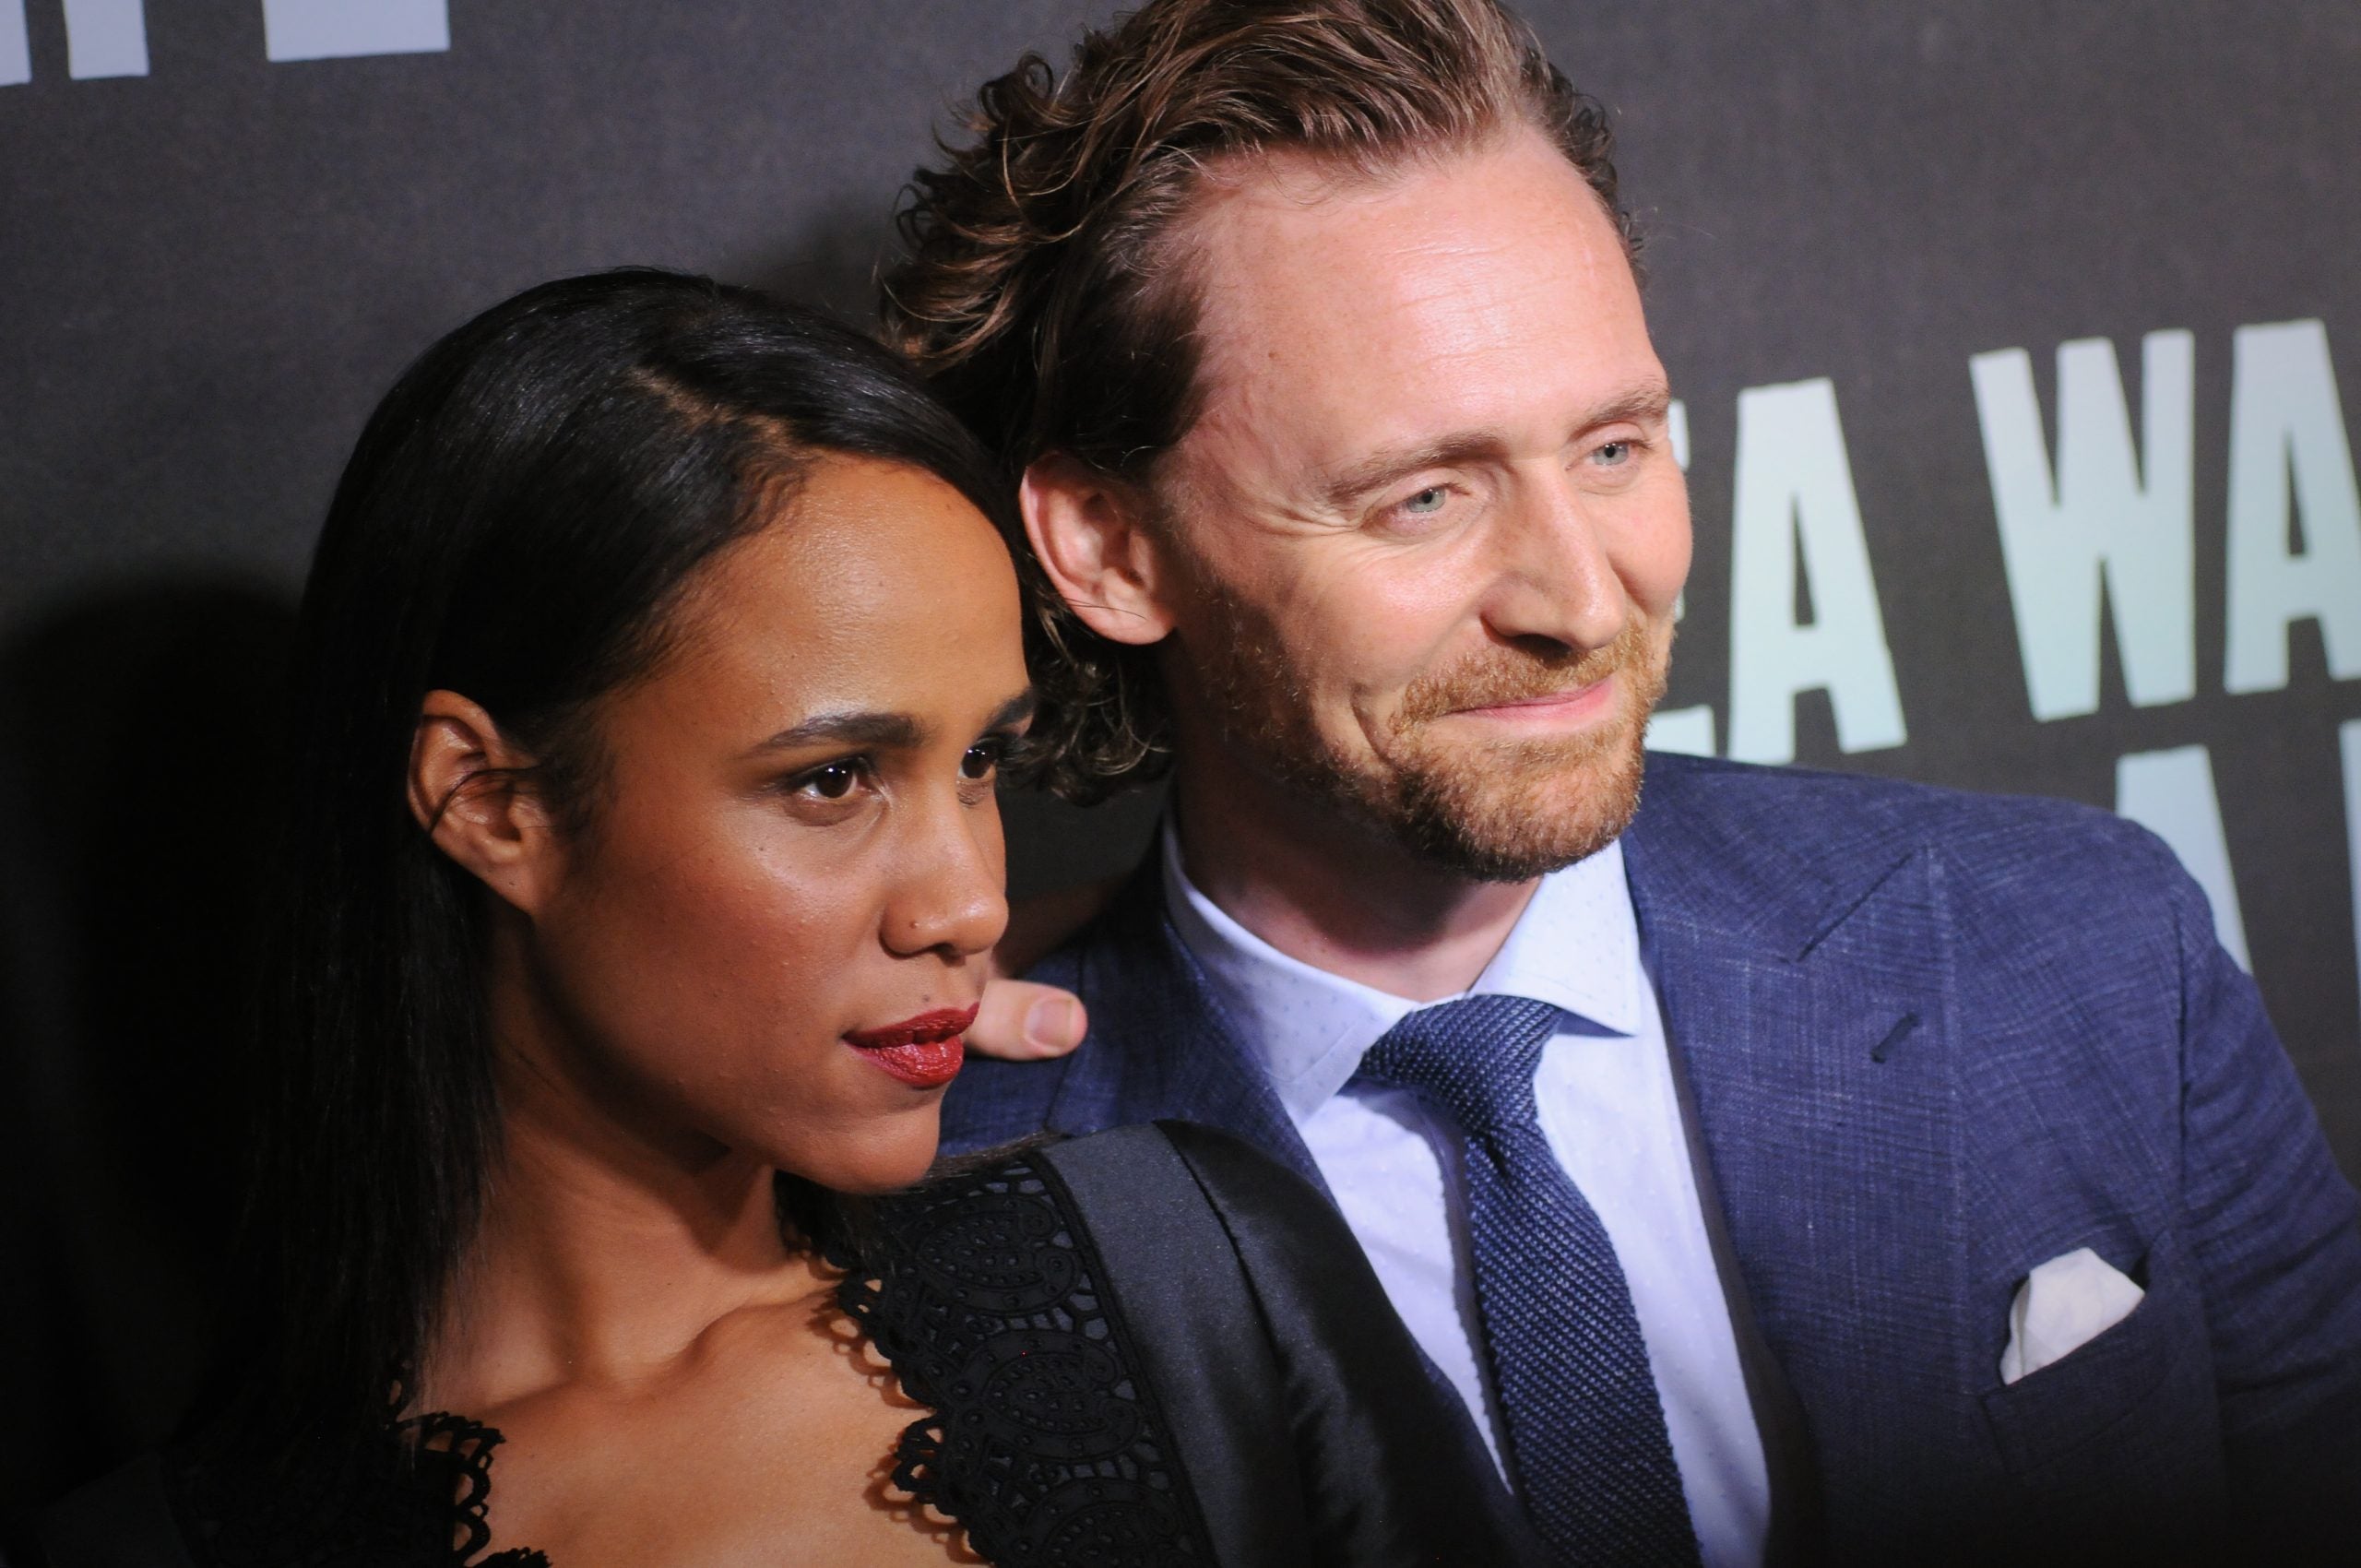 Loki's In Love: Actor Tom Hiddleston And Actress Zawe Ashton Are Reportedly Engaged